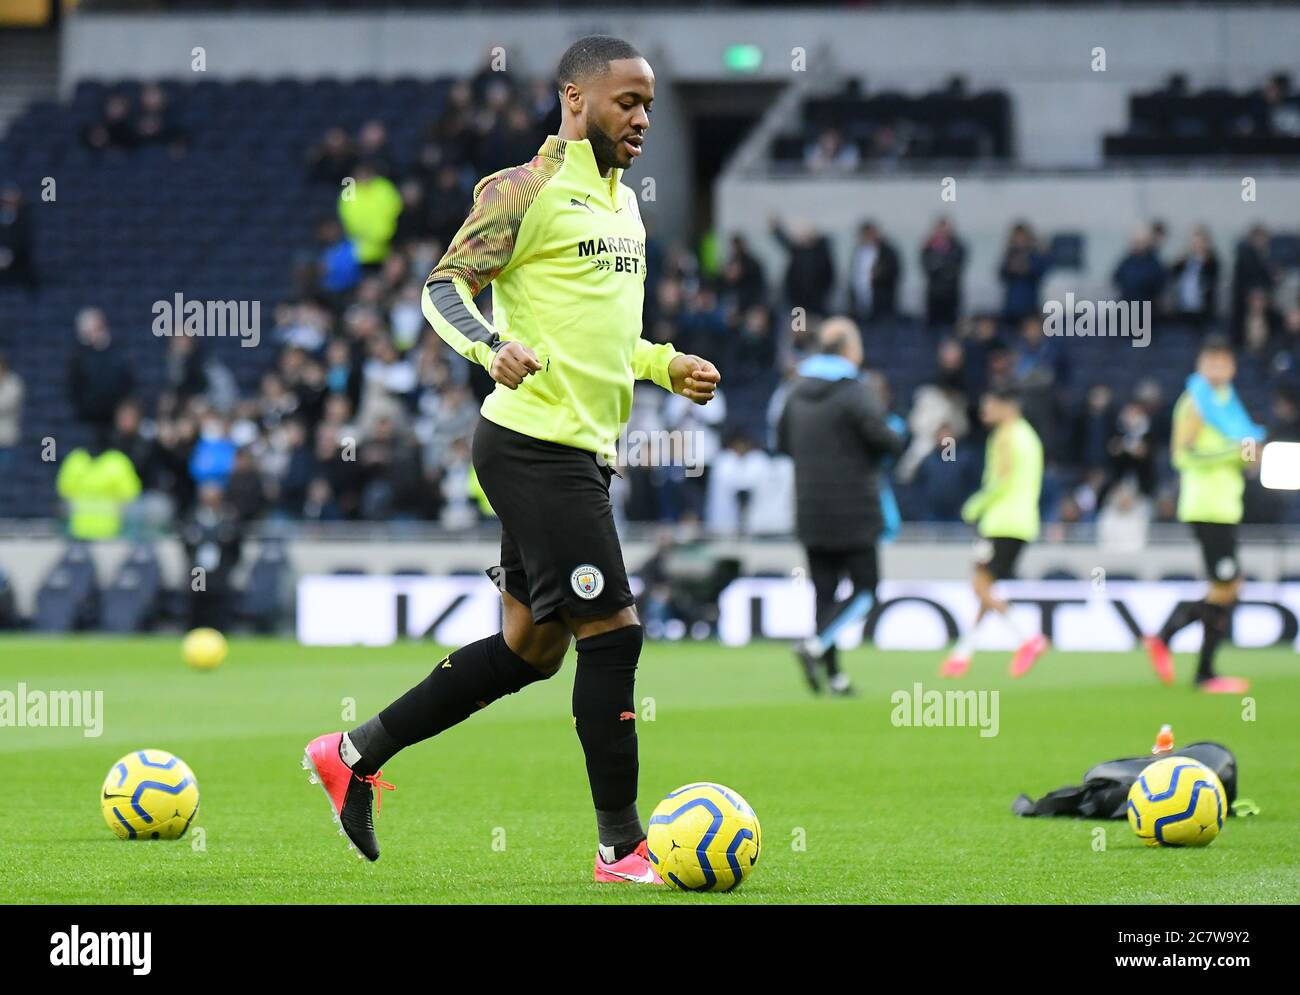 LONDON, ENGLAND - FEBRUARY 2, 2020: Raheem Sterling of City pictured prior to the 2019/20 Premier League game between Tottenham Hotspur and Manchester City at Tottenham Hotspur Stadium. Stock Photo